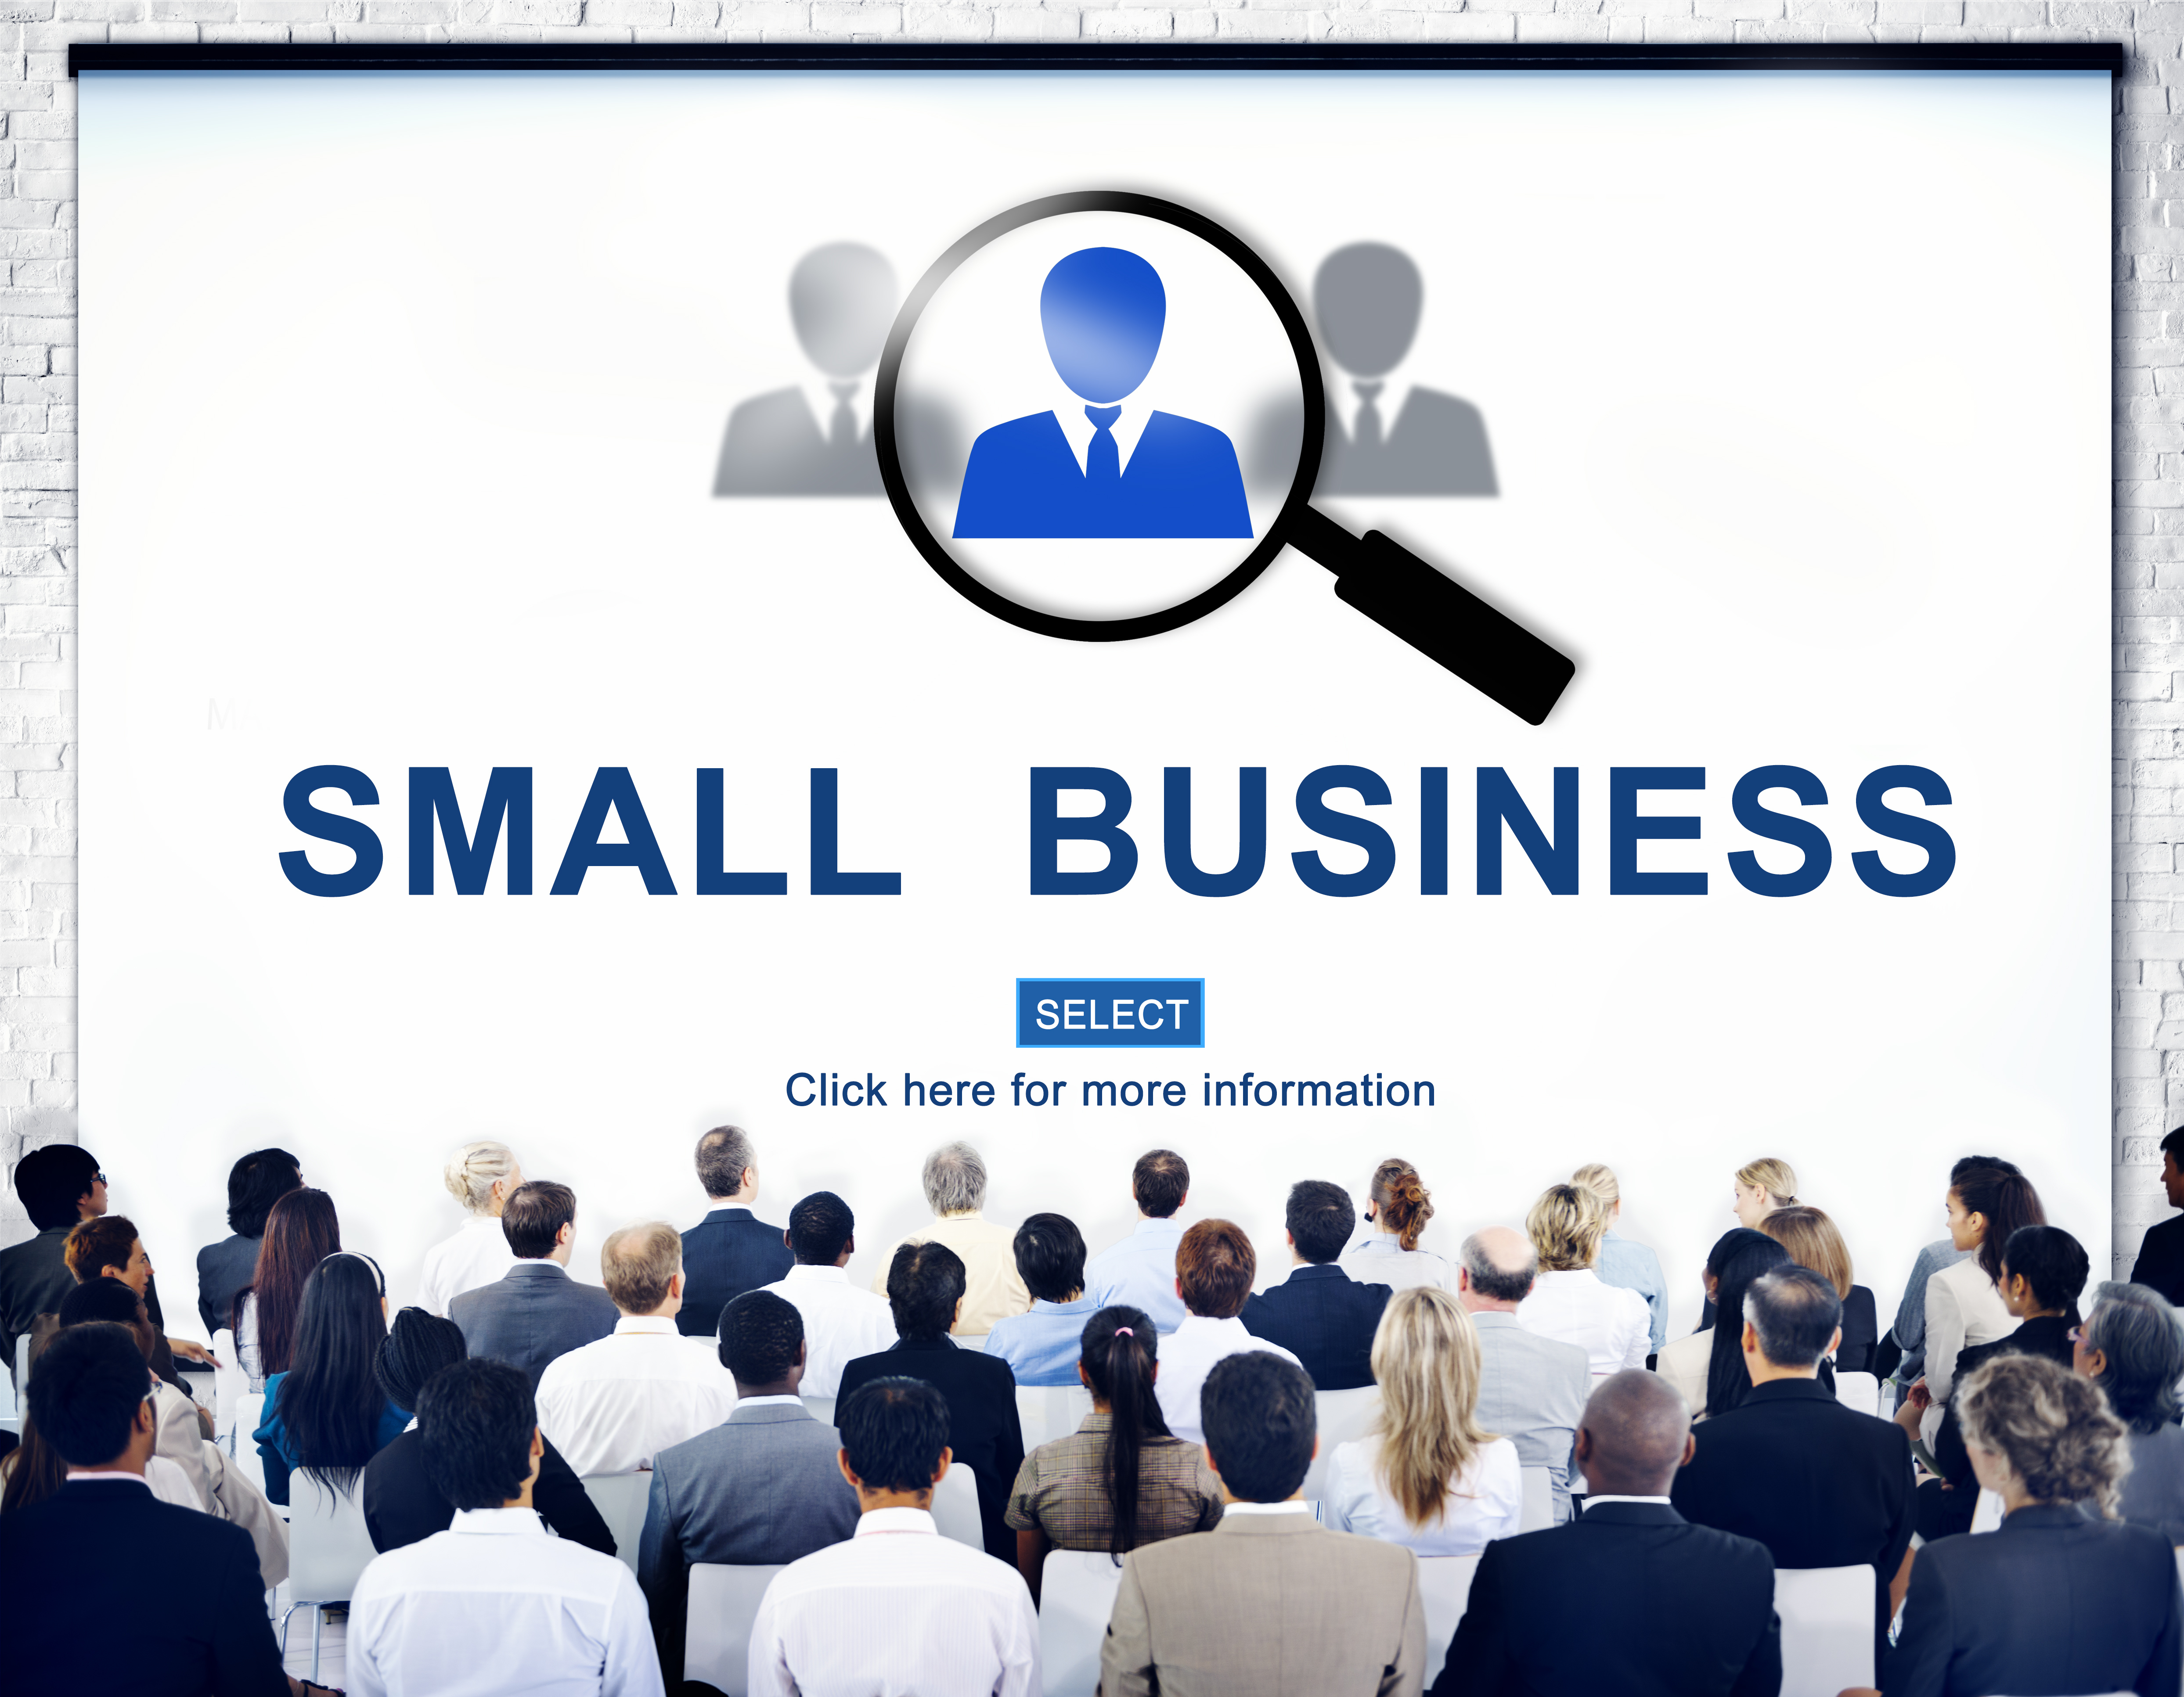 National Small Business Week offers learning and networking opportunities